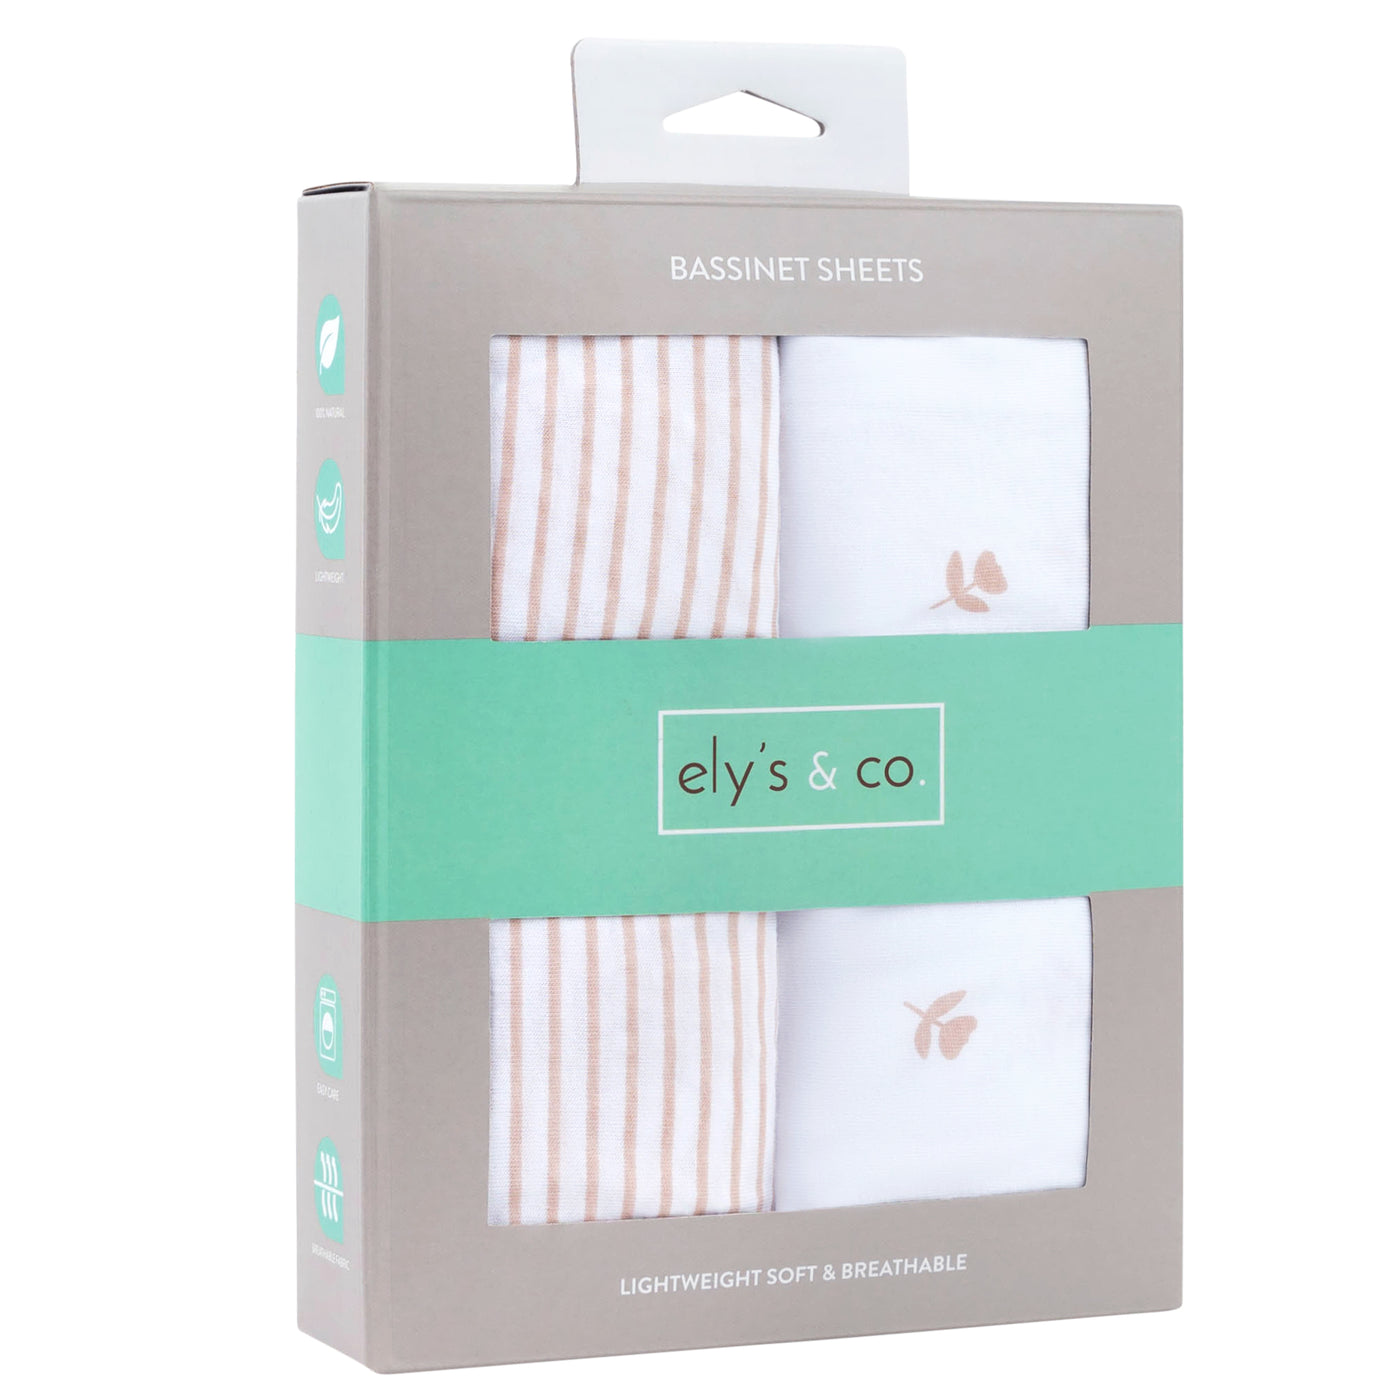 Ely's & Co. Two Pack Bassinet Sheets - Tulip/Stripe Collection Pink